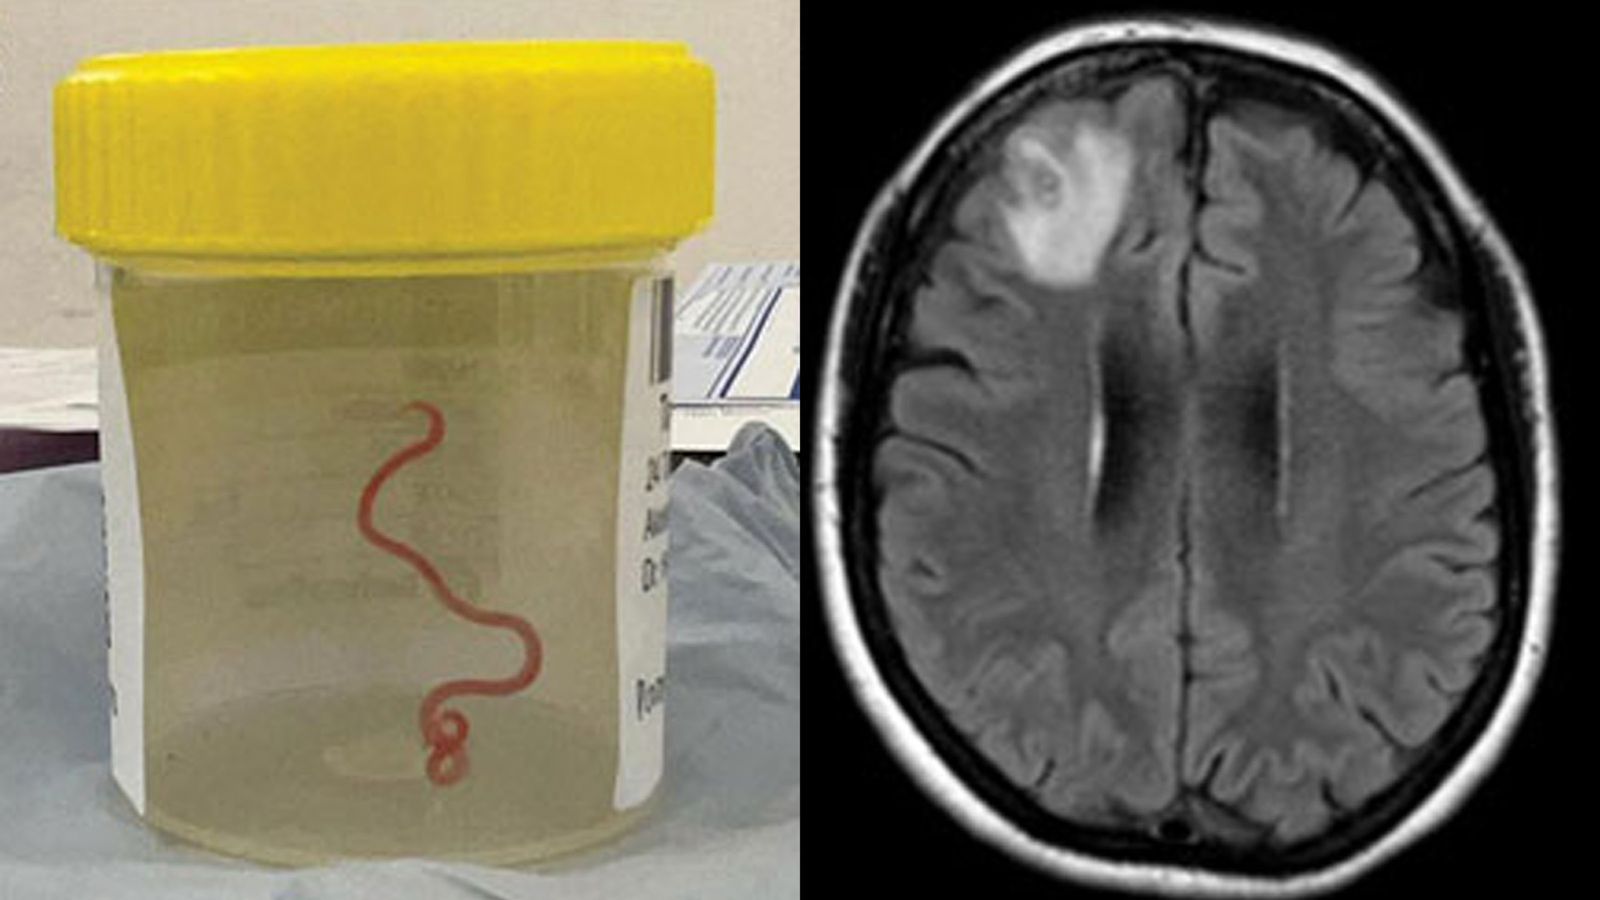 Live worm found in woman's brain in world-first discovery